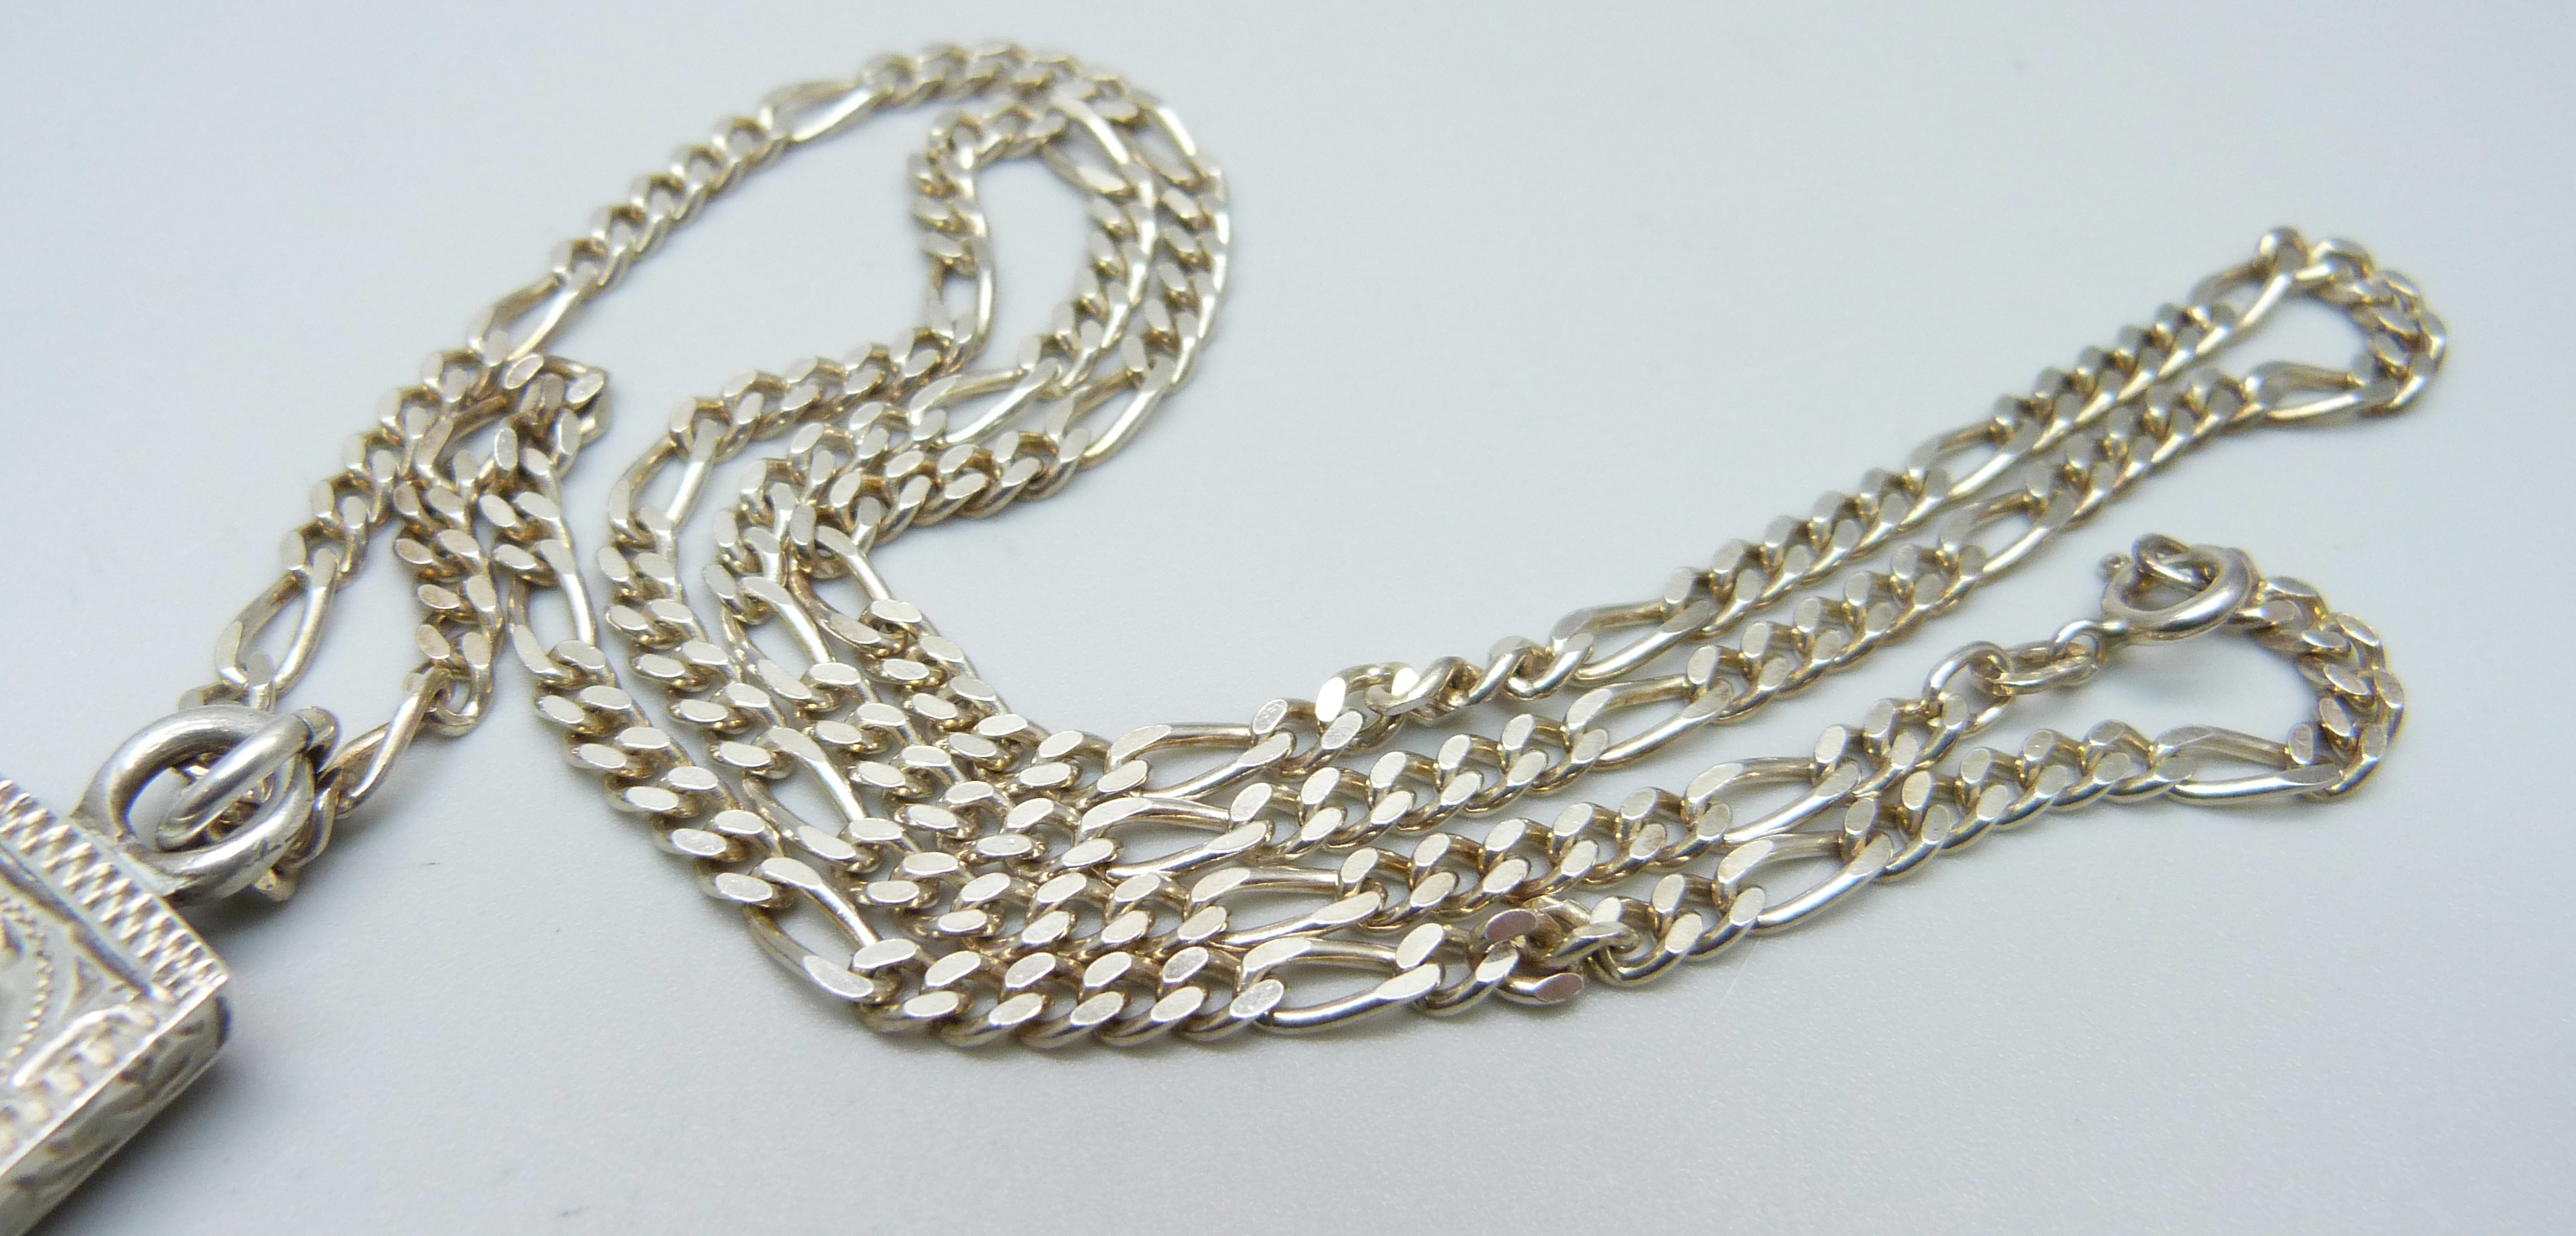 A silver ingot pendant on a silver chain, 39g, chain 59cm - Image 4 of 4